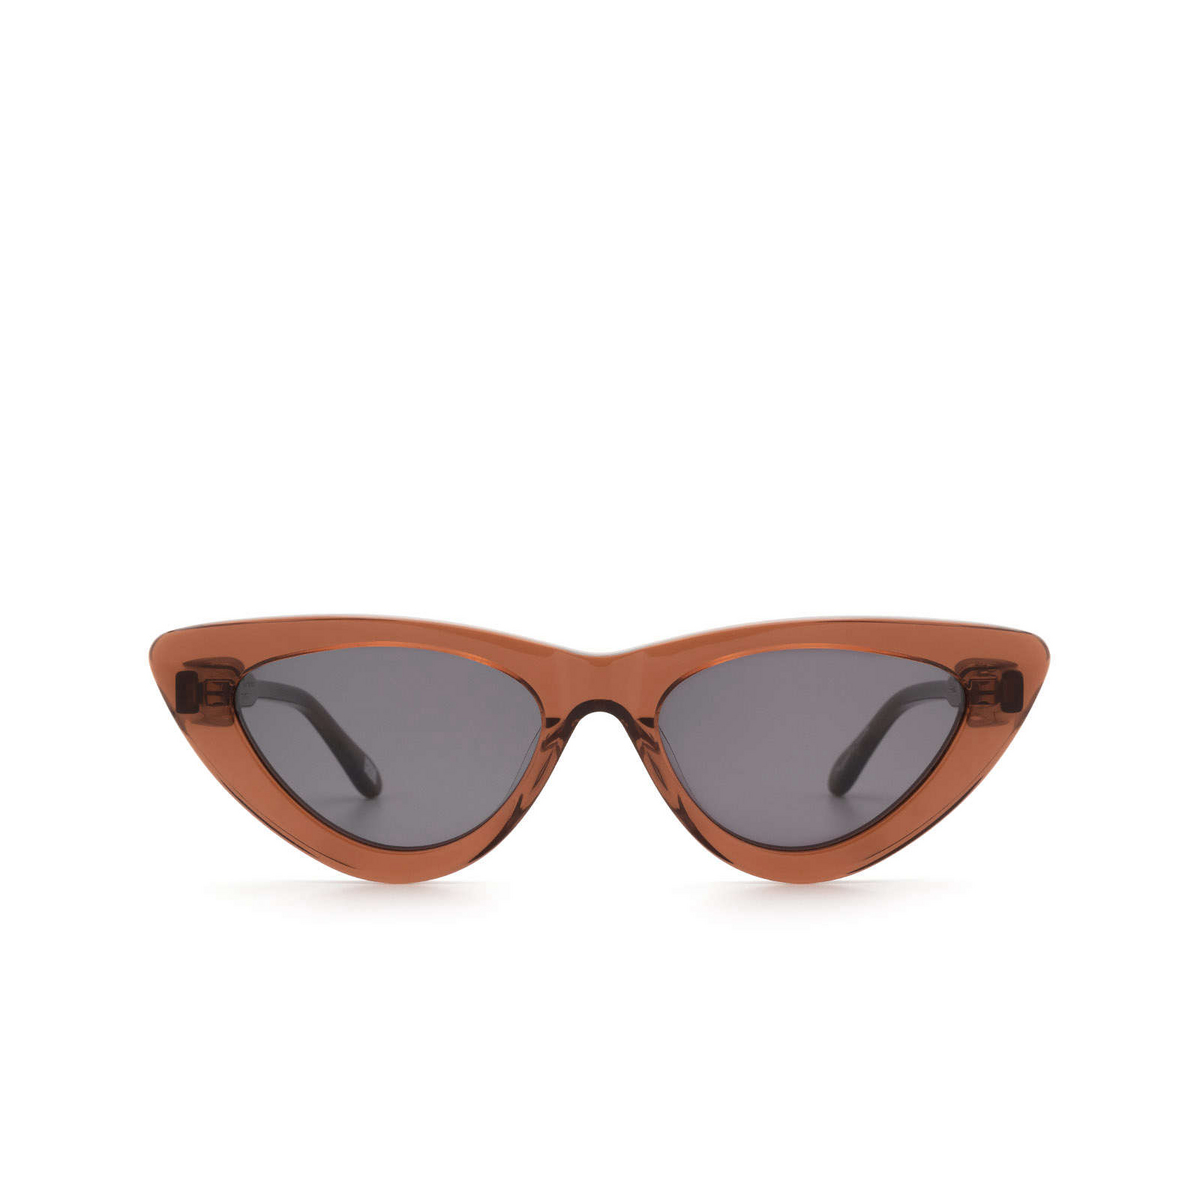 Chimi #006 Sunglasses COCO Brown - front view